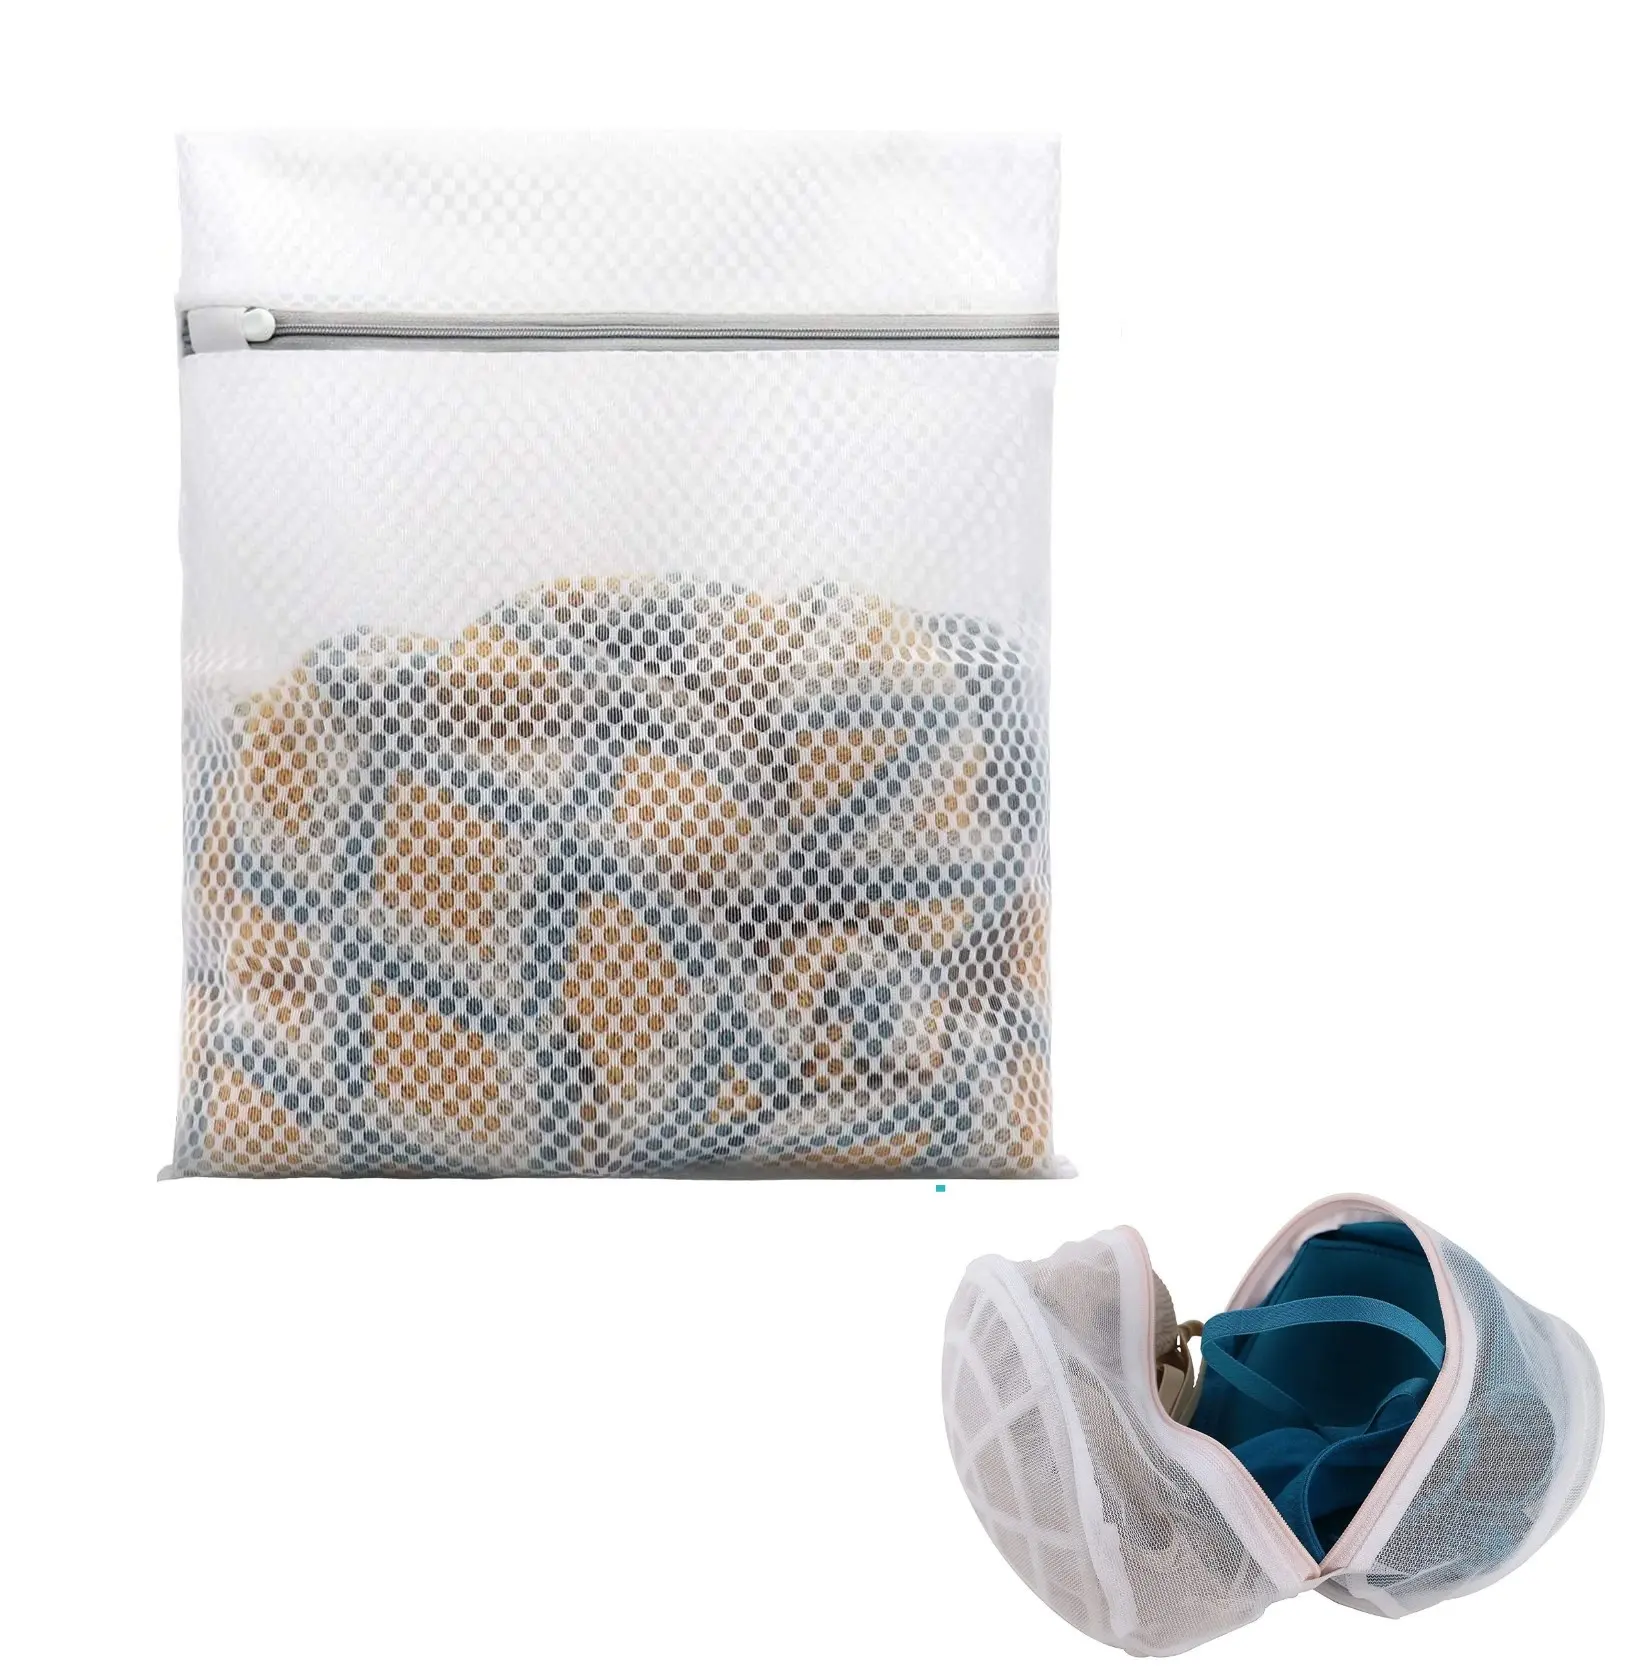 Eco friendly Hot Selling Large Garment Stocking Underwear Lingerie Mesh Laundry Bags for Stores